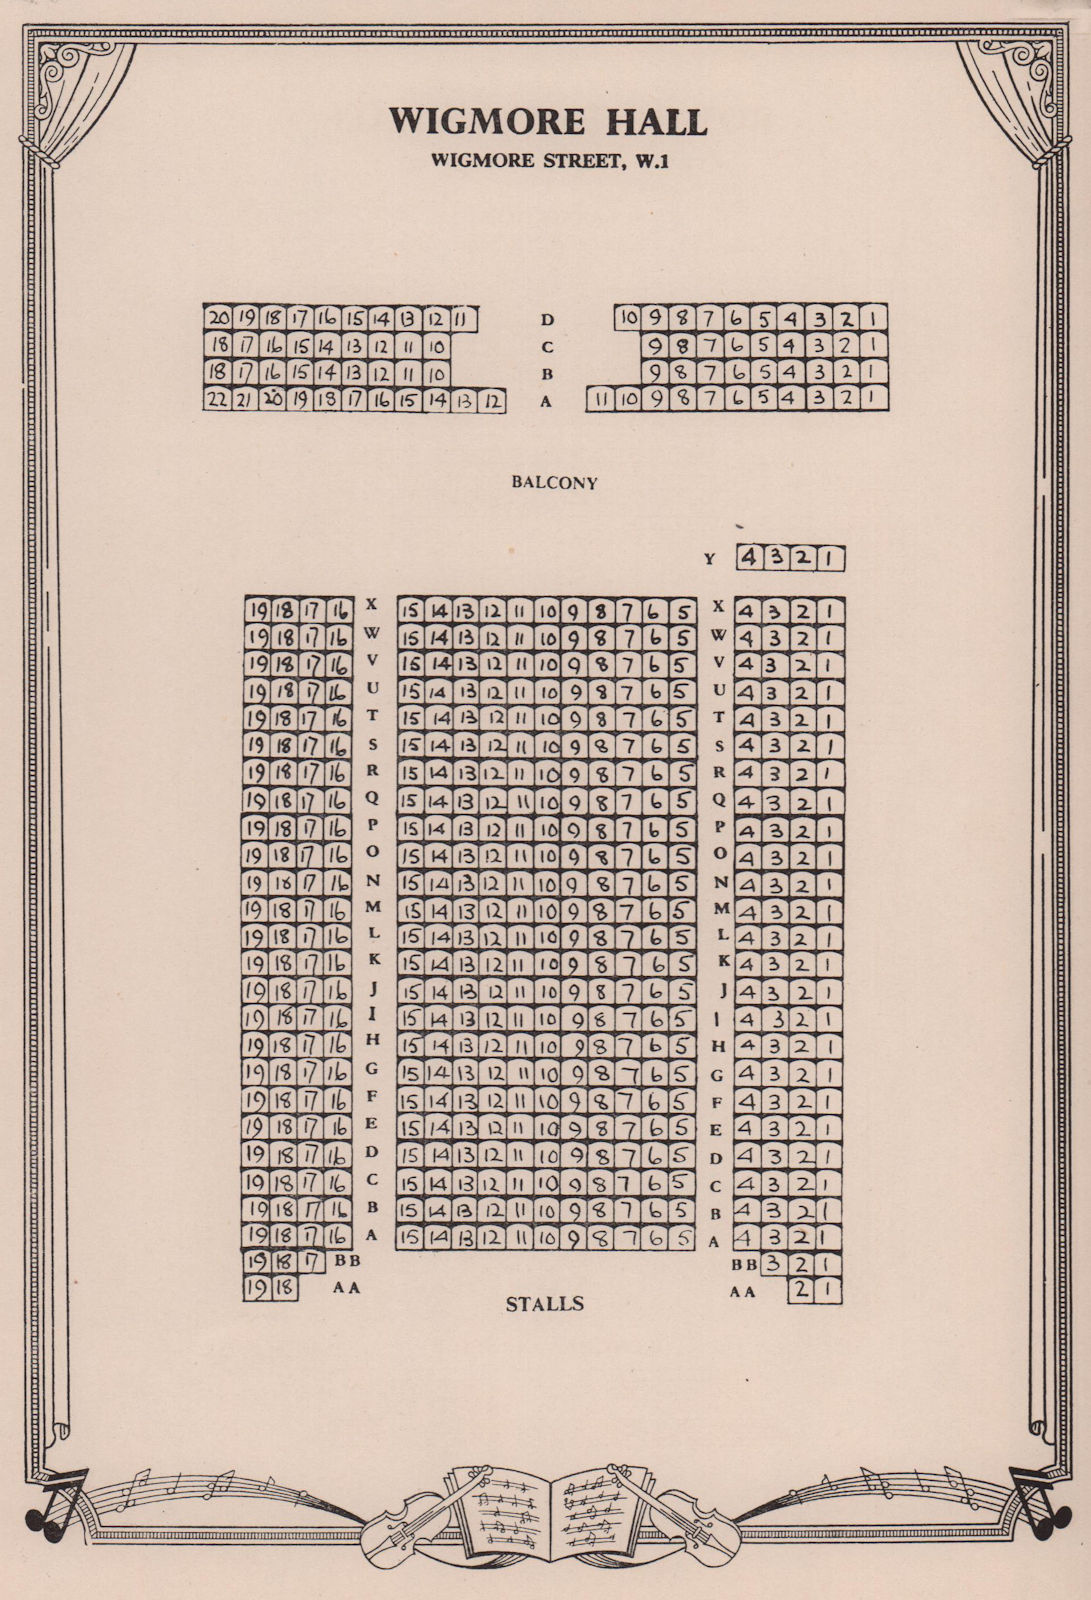 Associate Product Wigmore Hall, Wigmore Street, London. Vintage seating plan 1955 old print